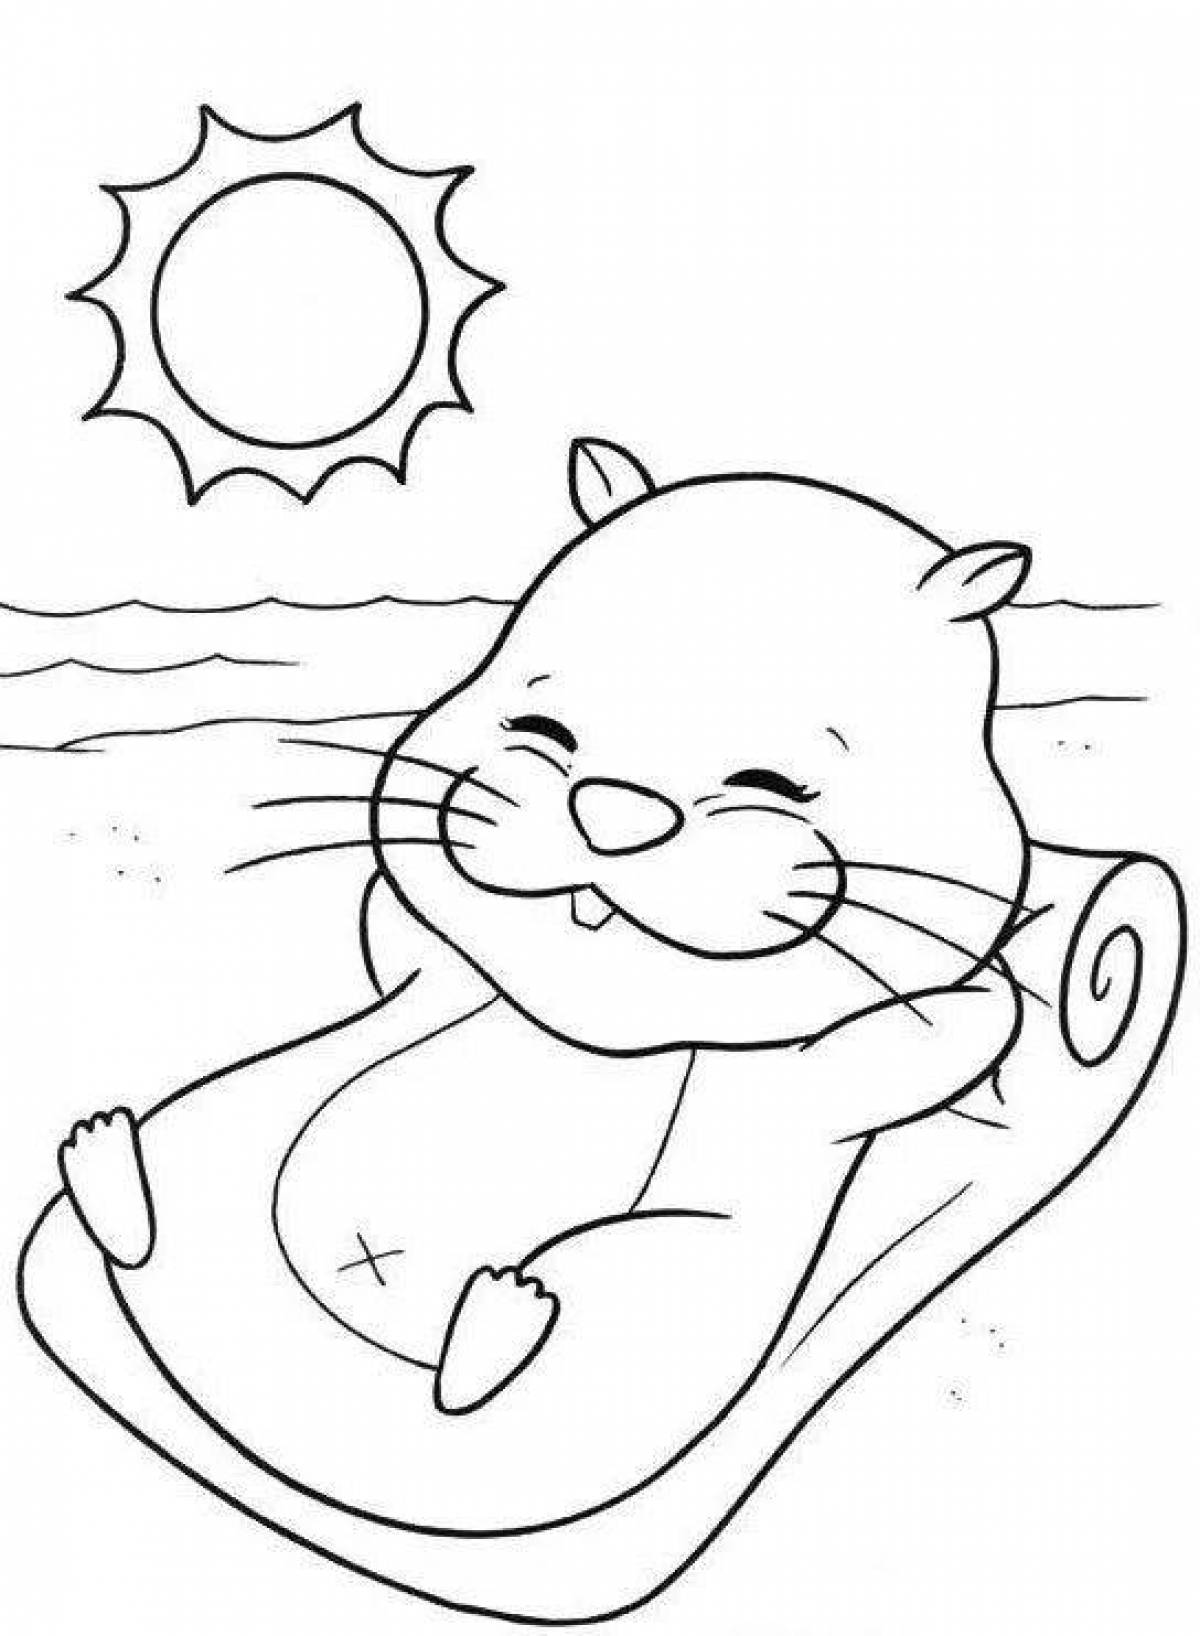 Amazing hamster coloring page for kids